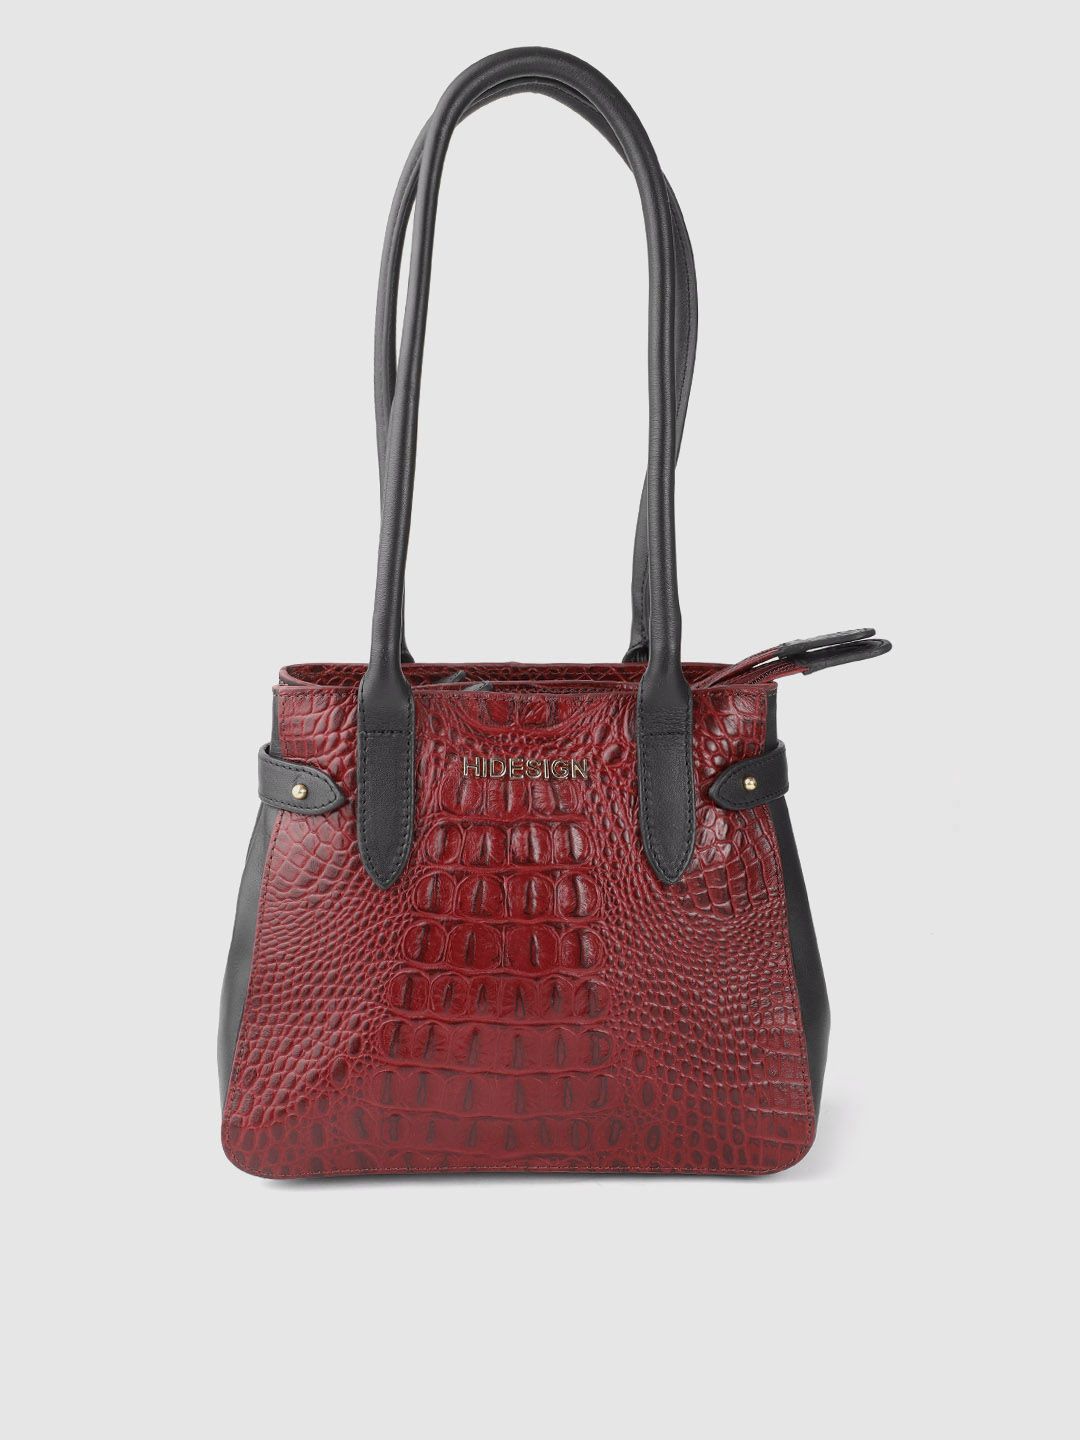 Hidesign Maroon & Black Croc Textured Leather Handcrafted Structured Shoulder Bag Price in India